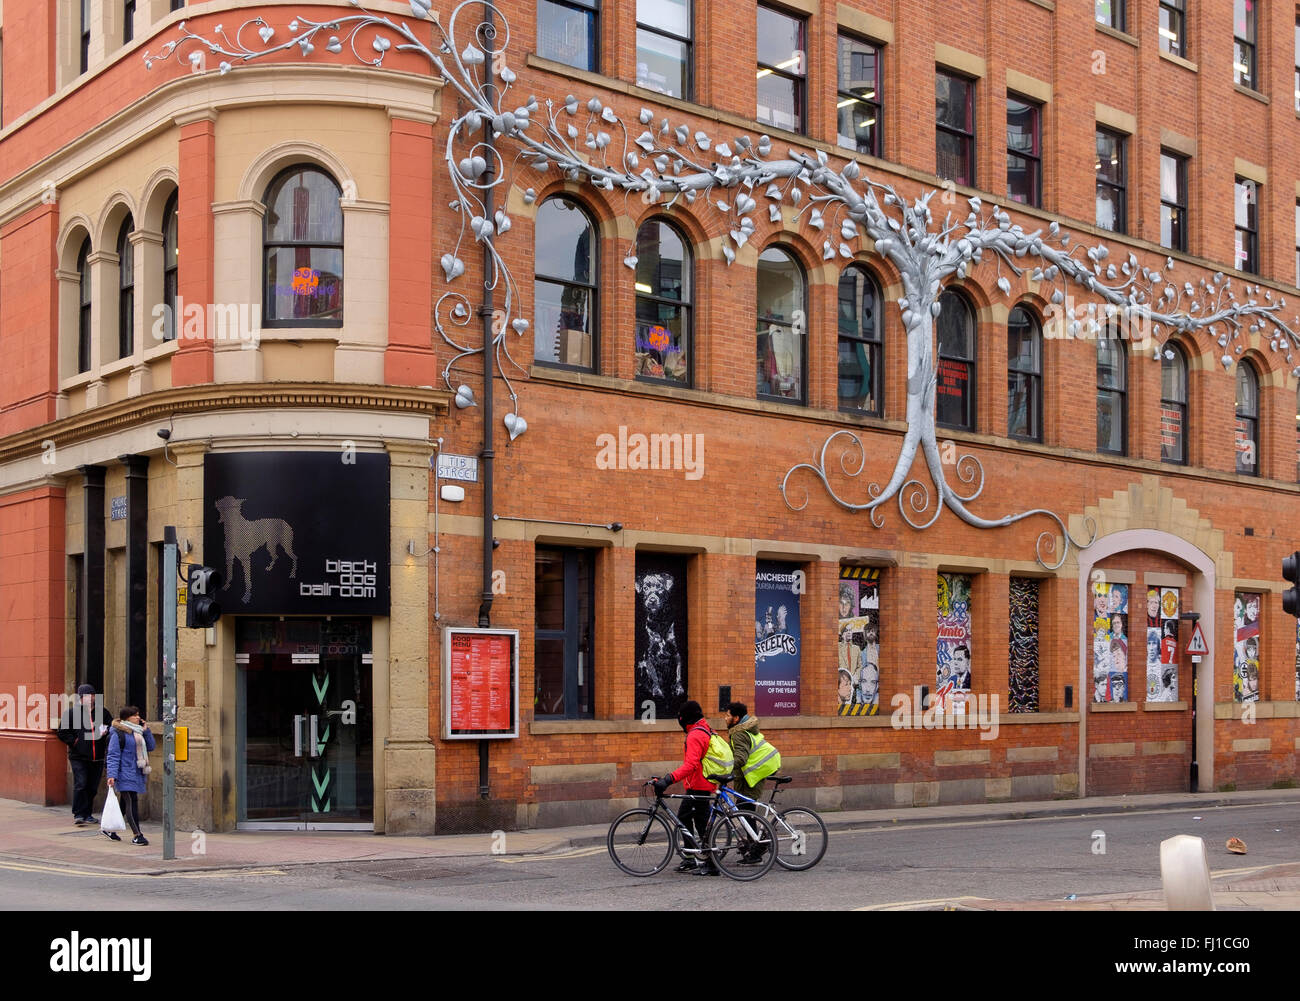 Manchester, UK - 16 February 2016: Afflecks is an alternative department store in the Northern Quarter Stock Photo